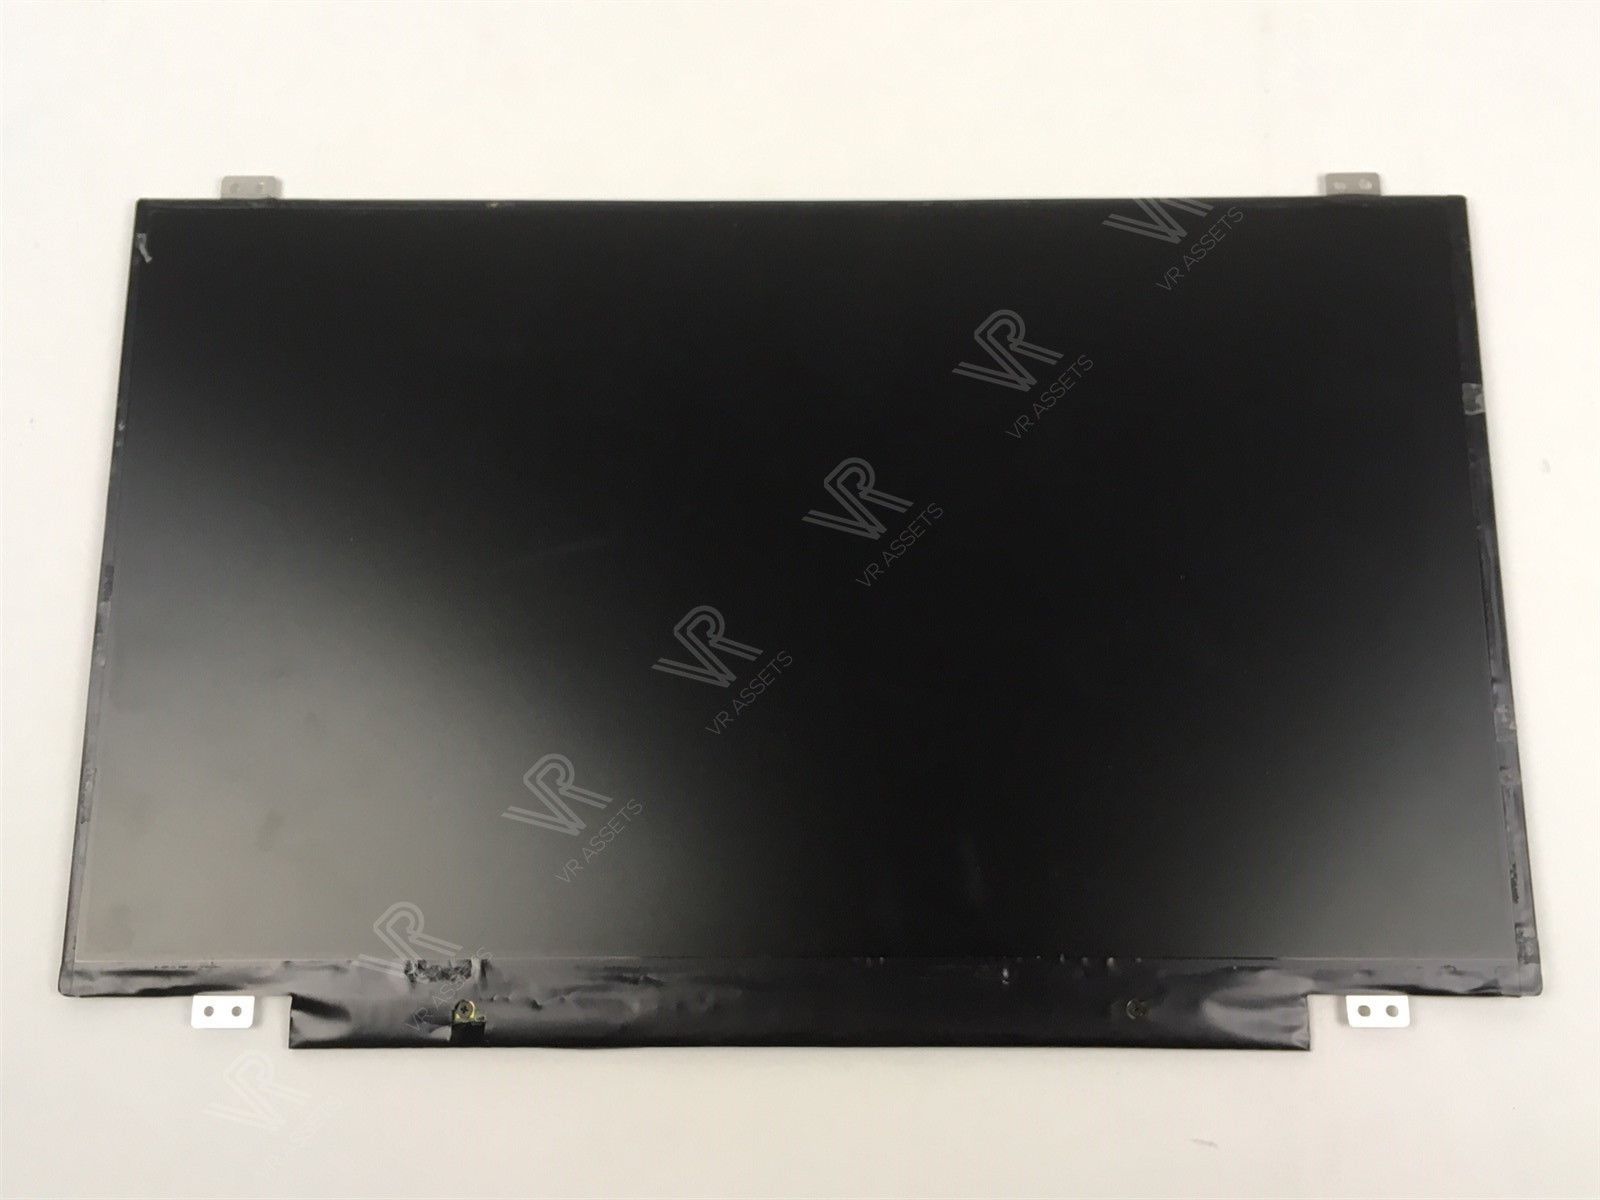 Dell Latitude E6440 14" LED LCD Replacement Screen Panel W92HV 0W92HV